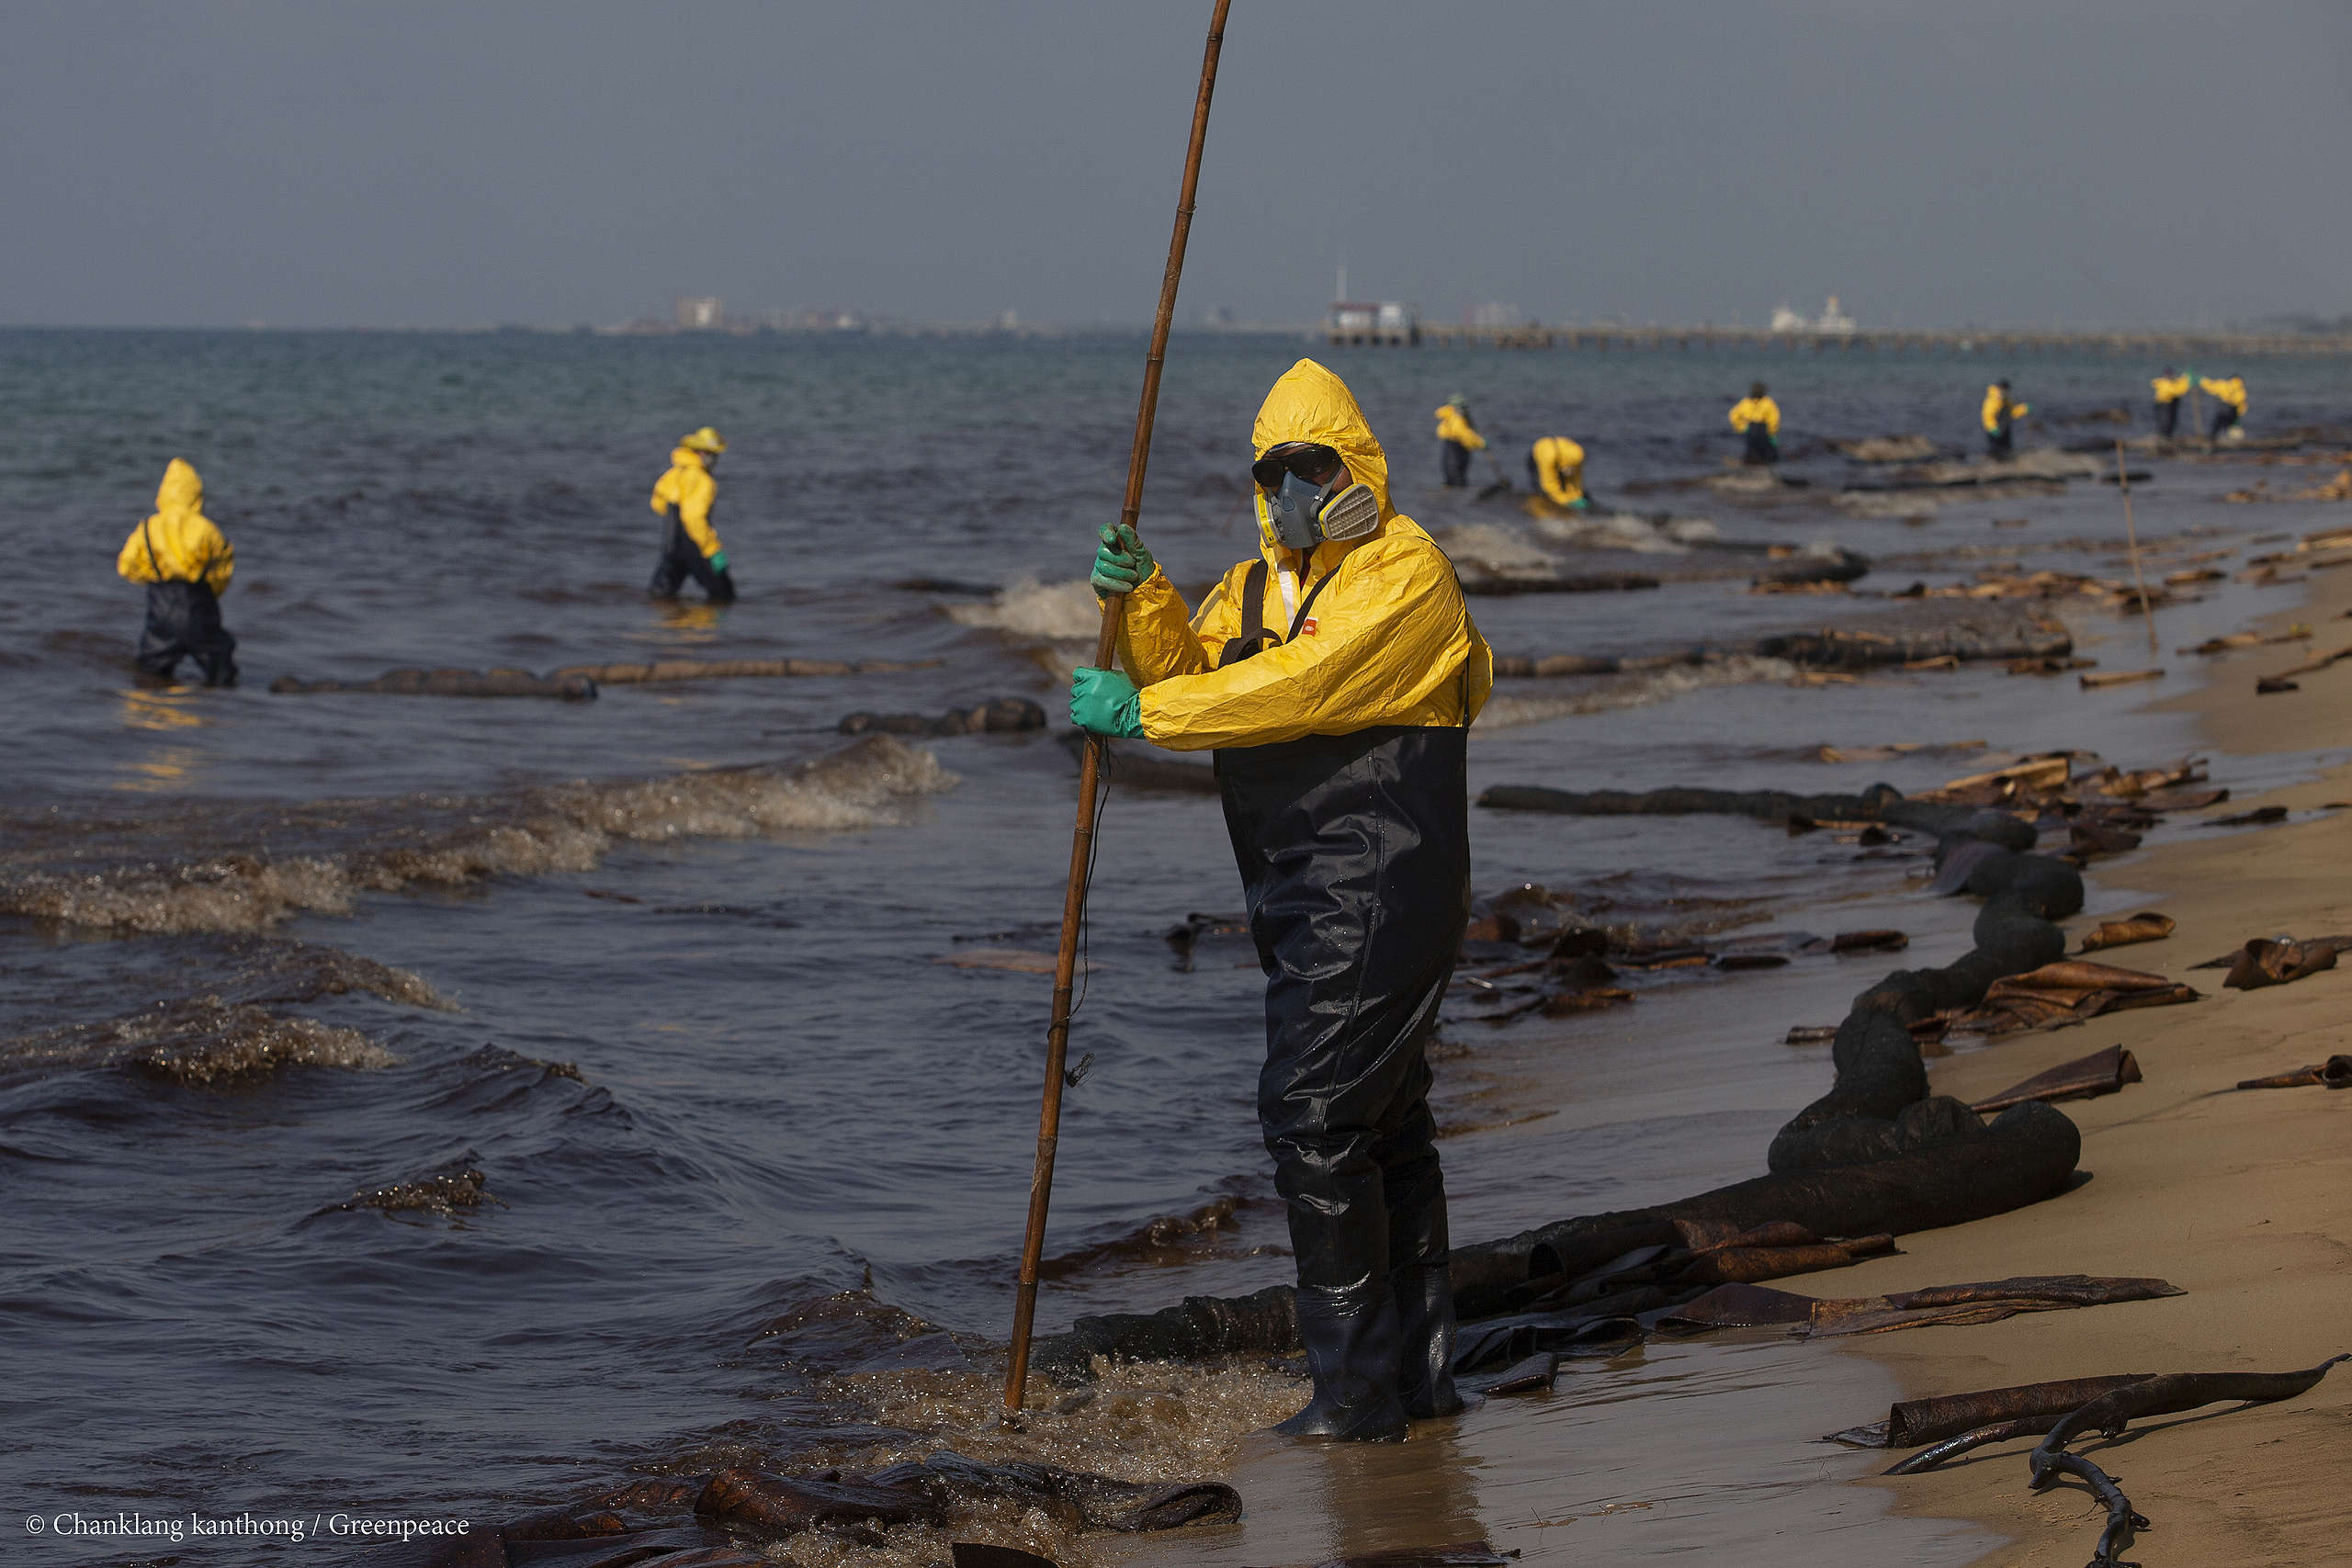 Oil Pollution at Sea: The Fossil Fuel Industry's Liability